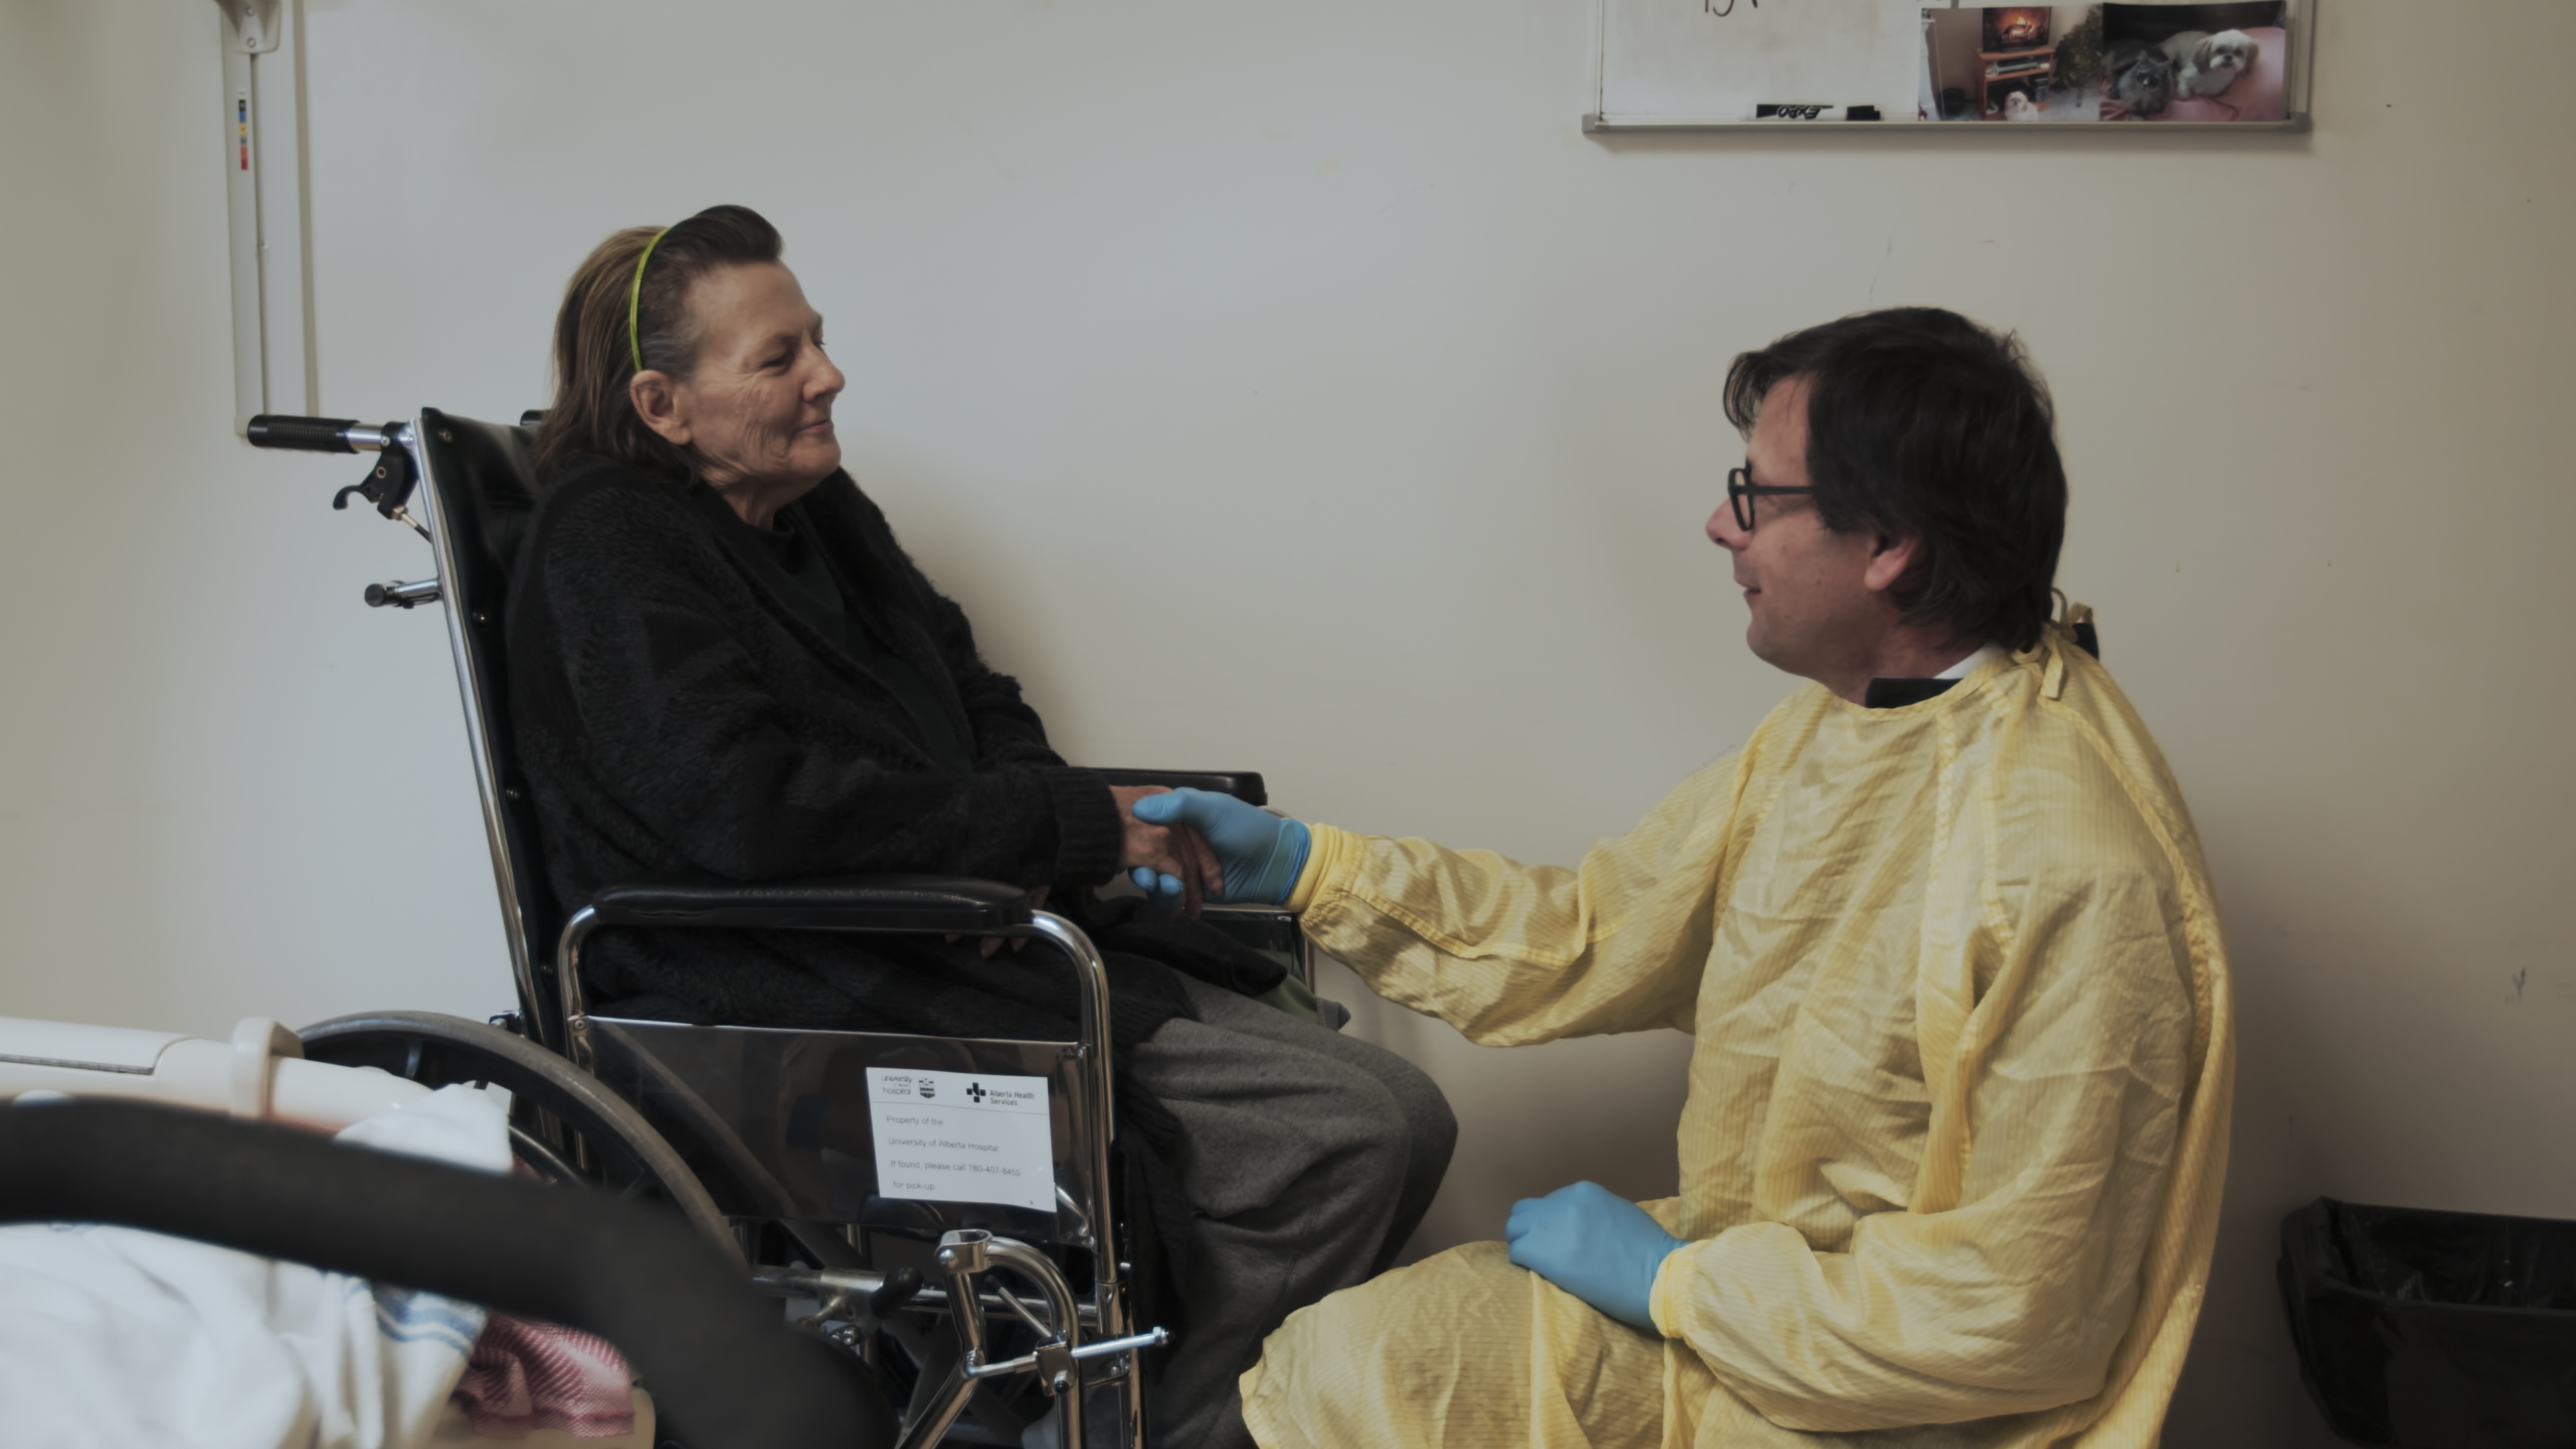 James Shapiro meets a patient following her transplant operation